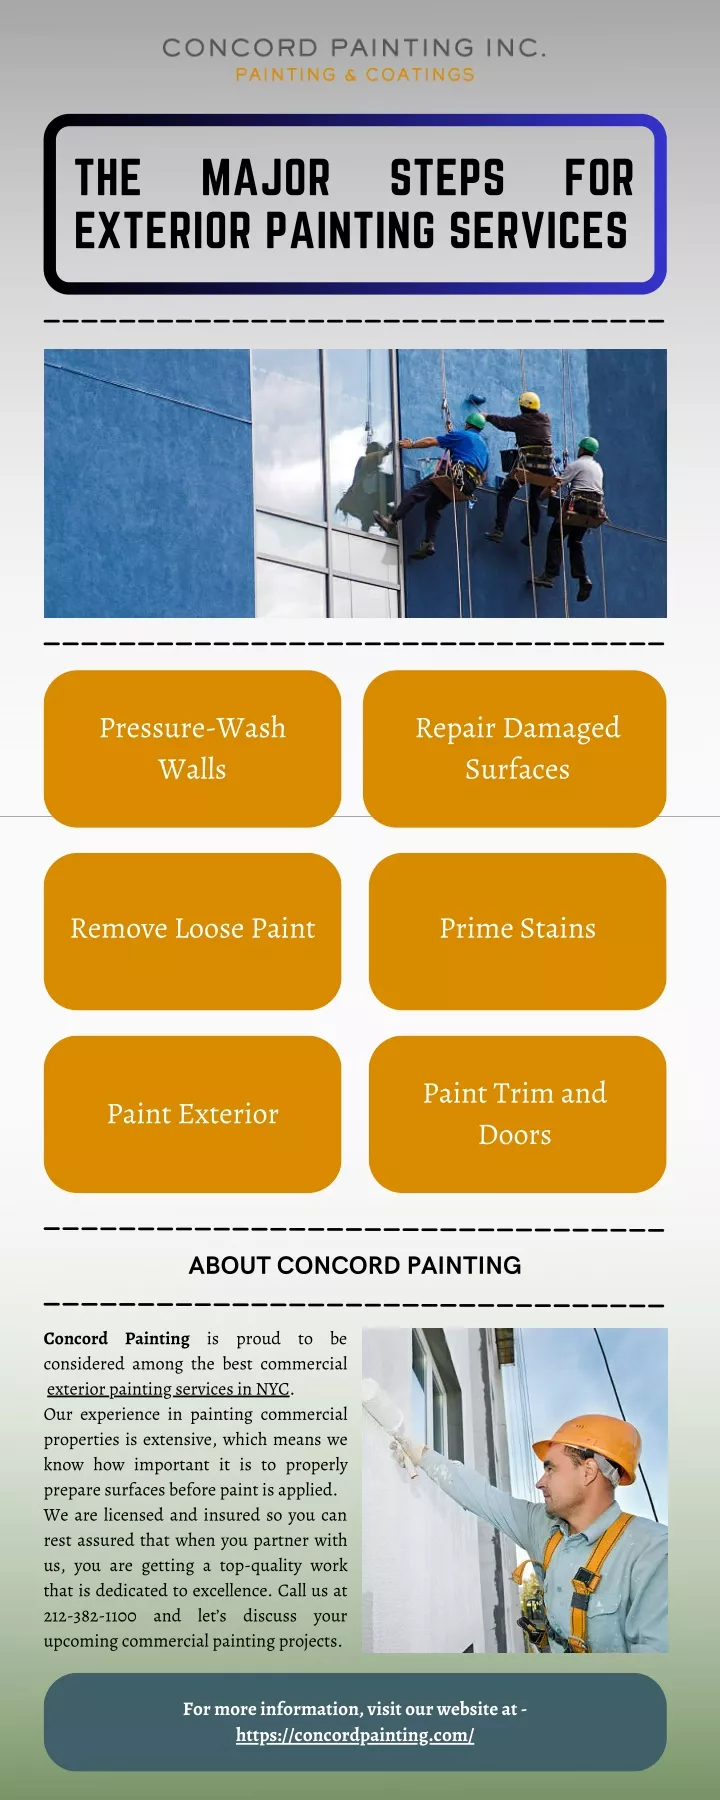 the exterior painting services